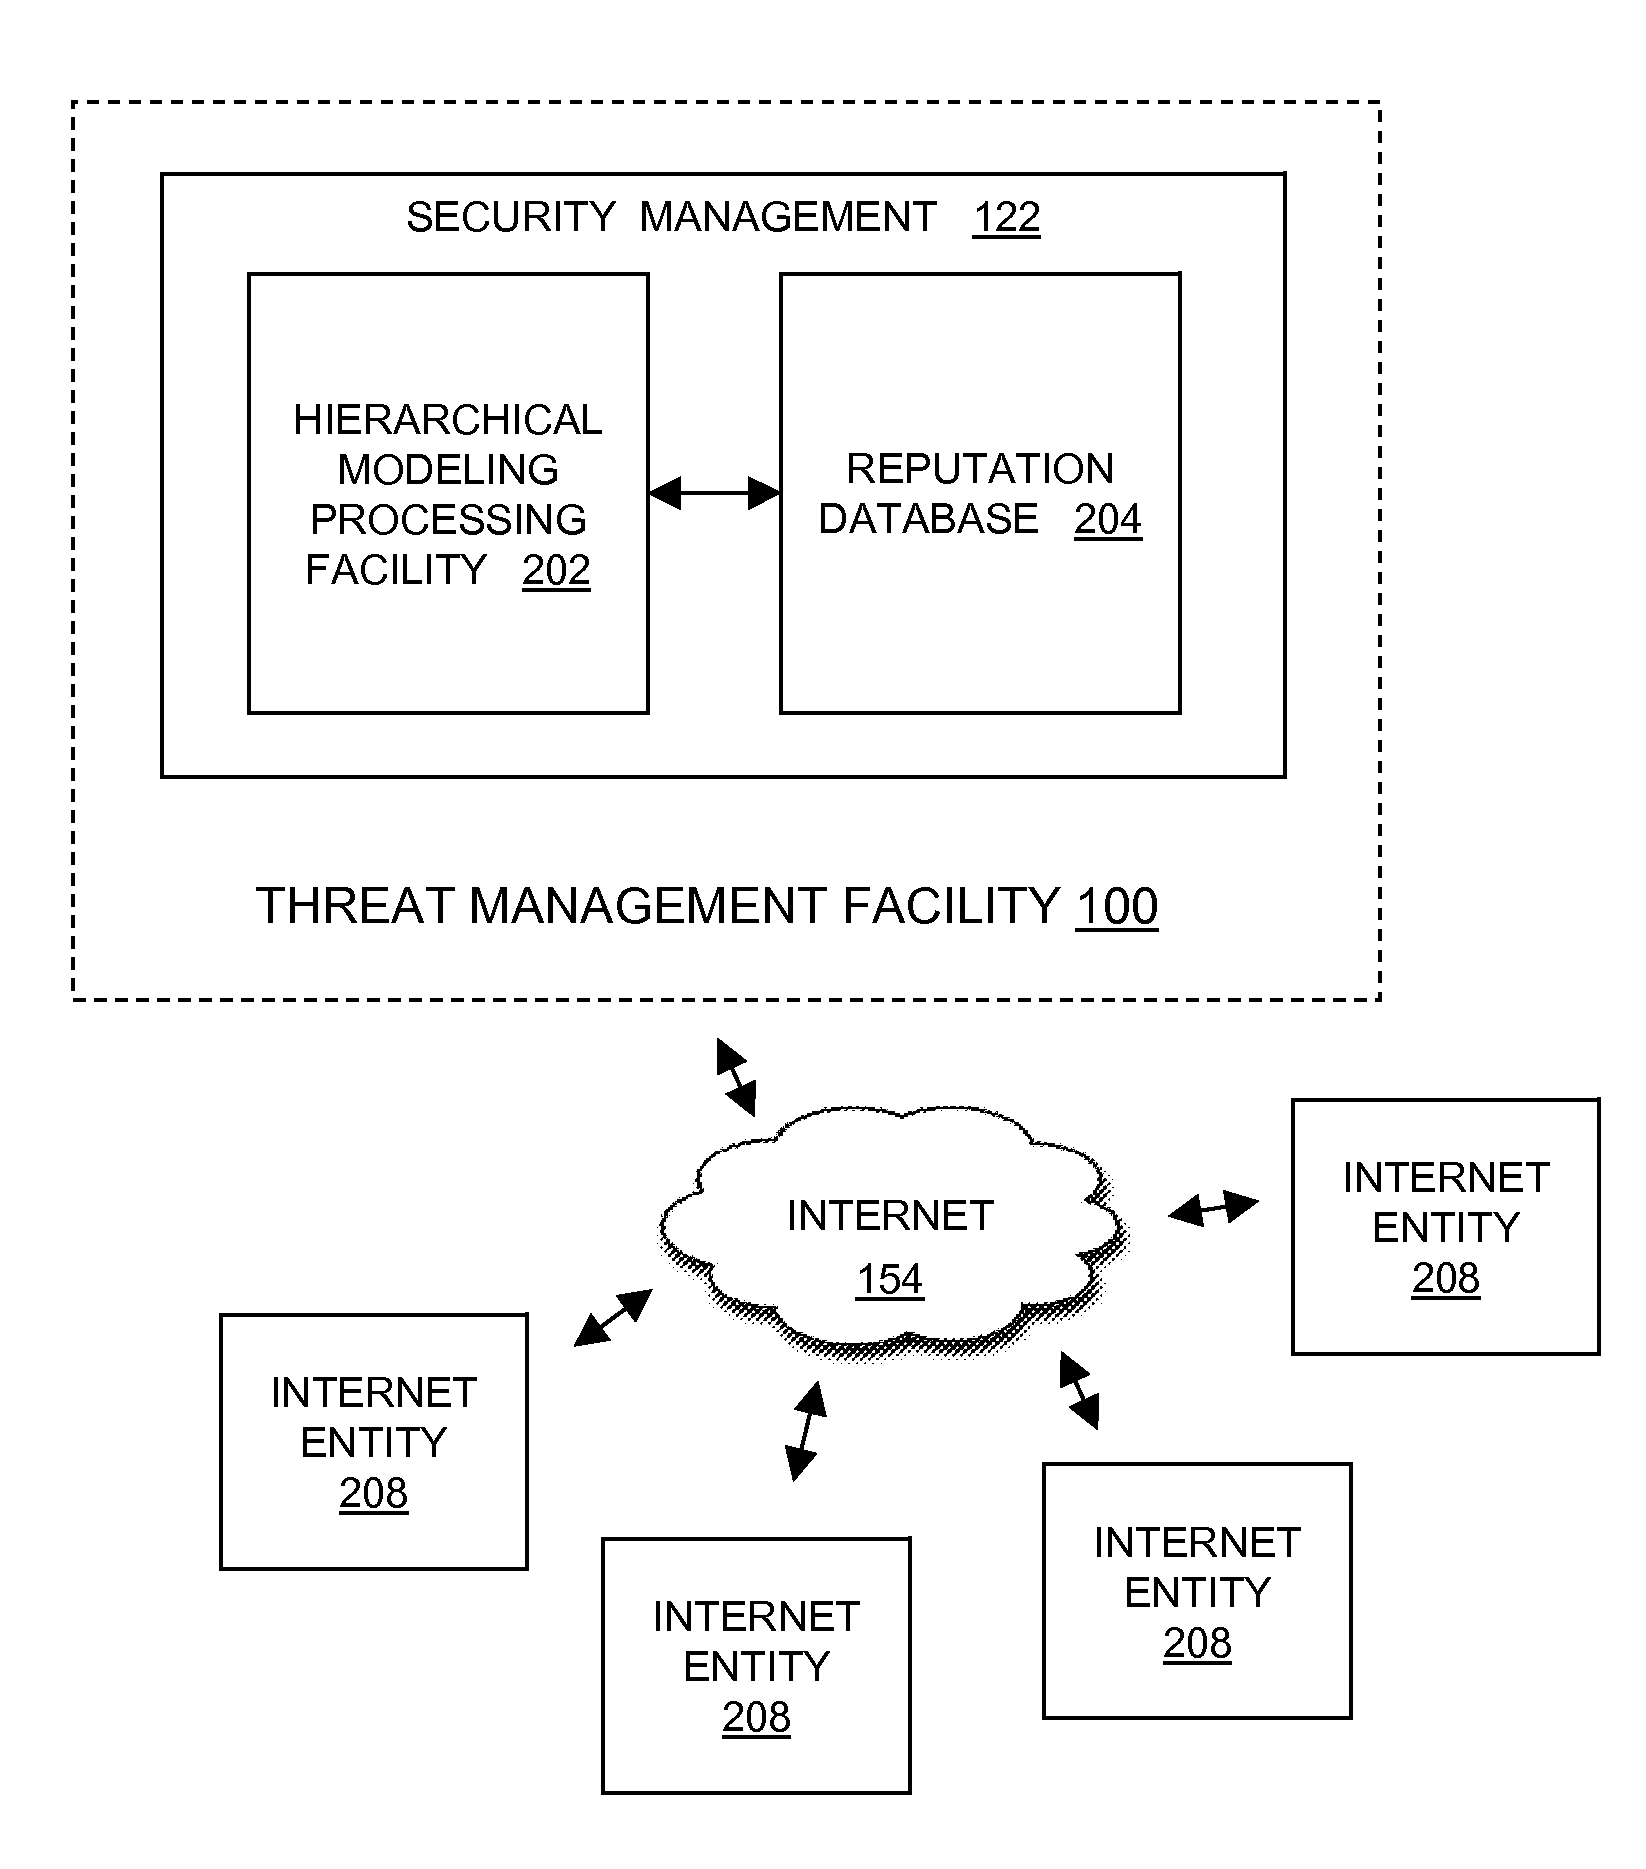 Hierarchical statistical model of internet reputation